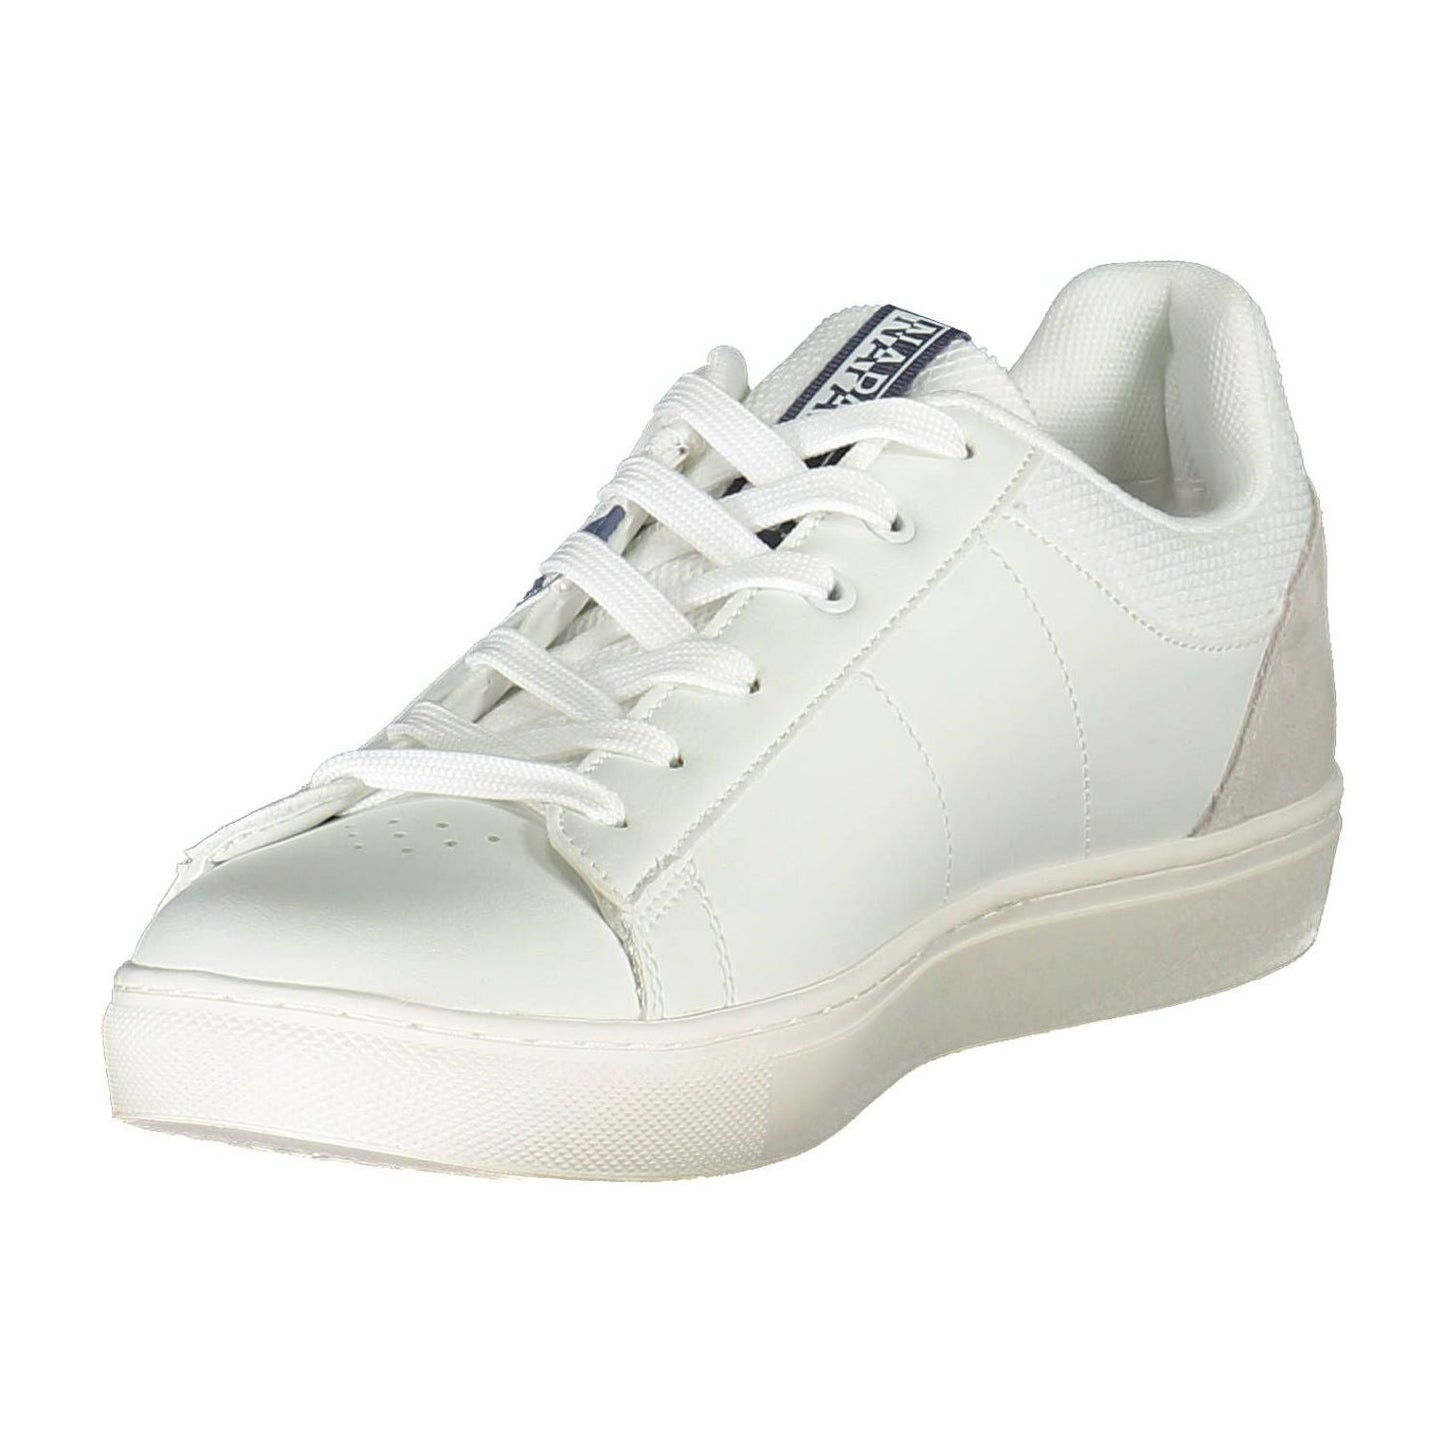 Napapijri Chic White Lace-Up Sneakers with Logo Accent chic-white-lace-up-sneakers-with-logo-accent